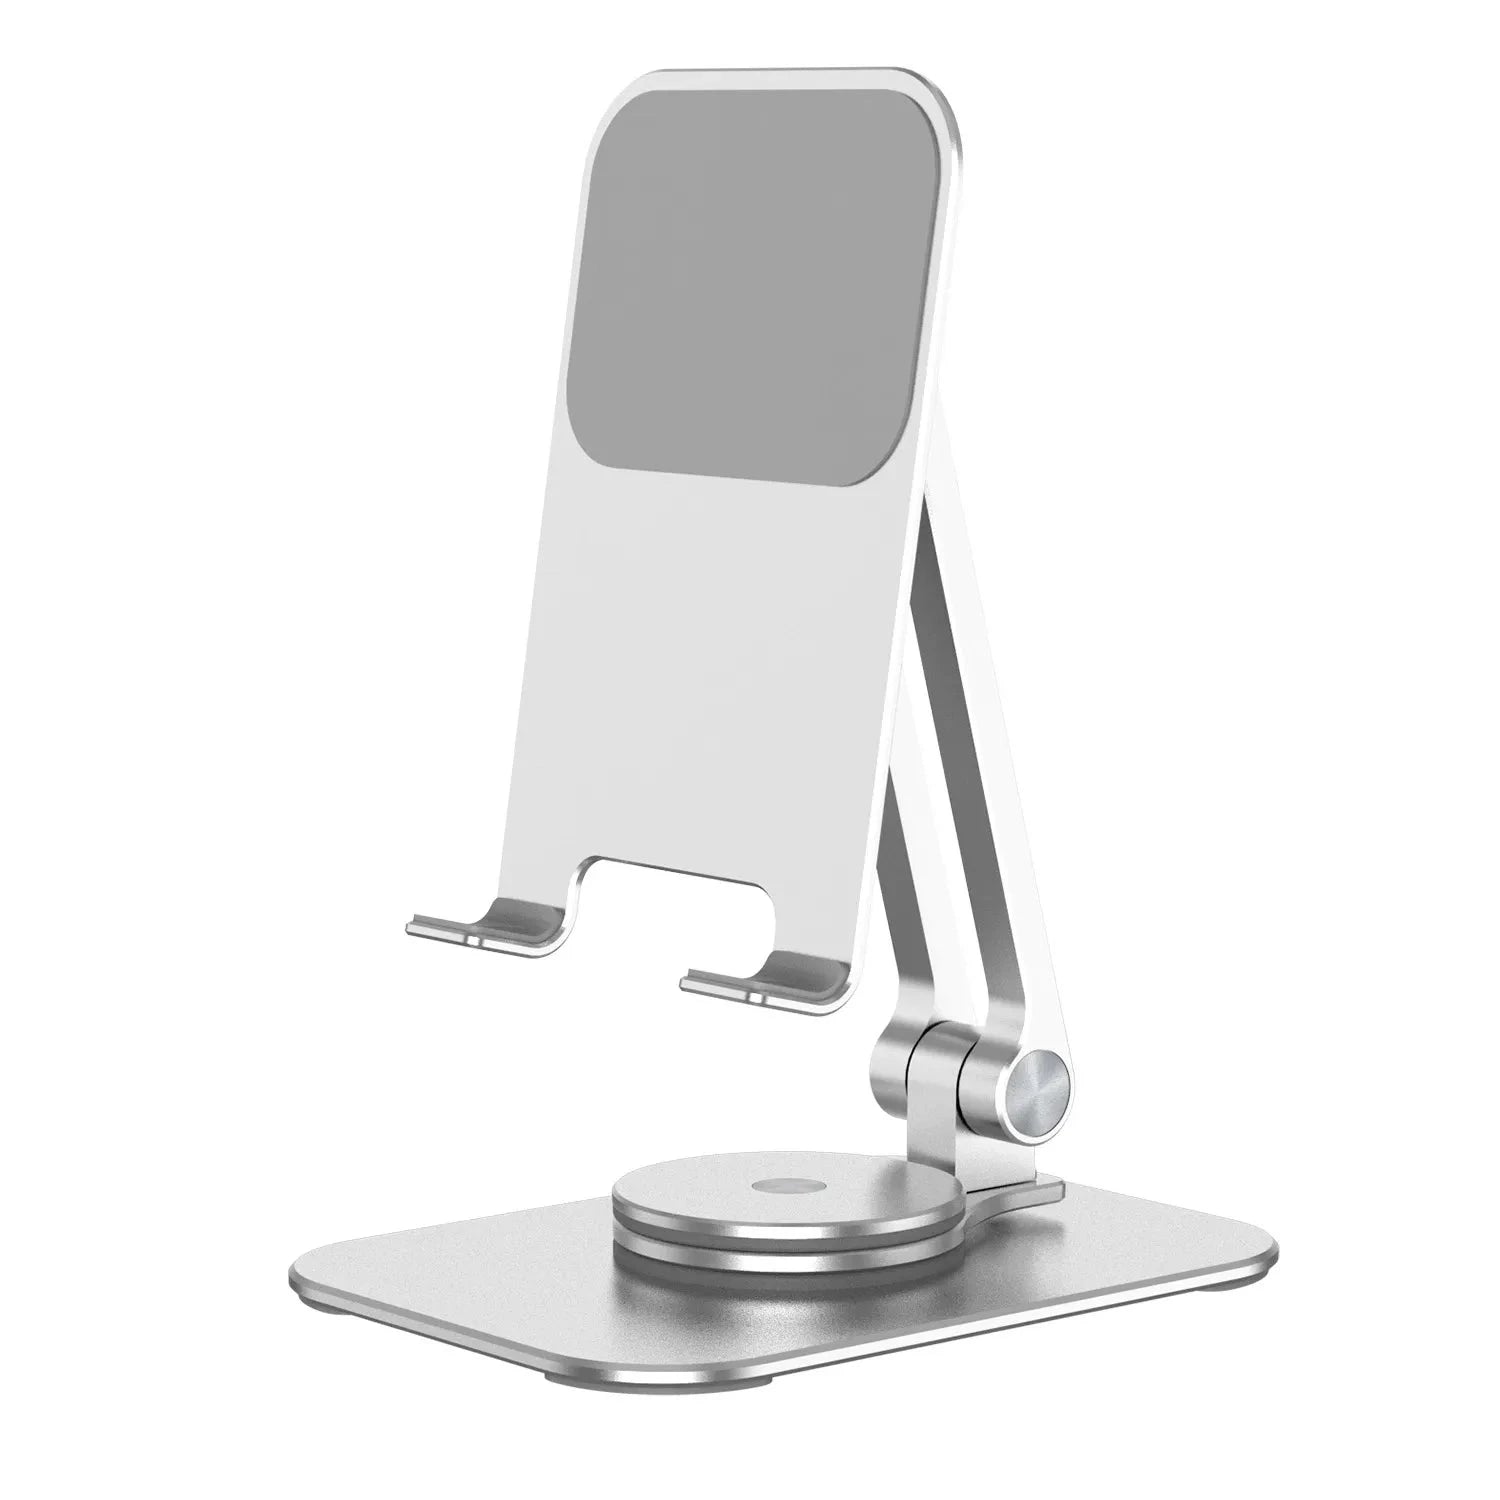 Portable Foldable Phone Stand, 360 Degree Rotation, Height Adjustable, Cell Phone  Holder - White 